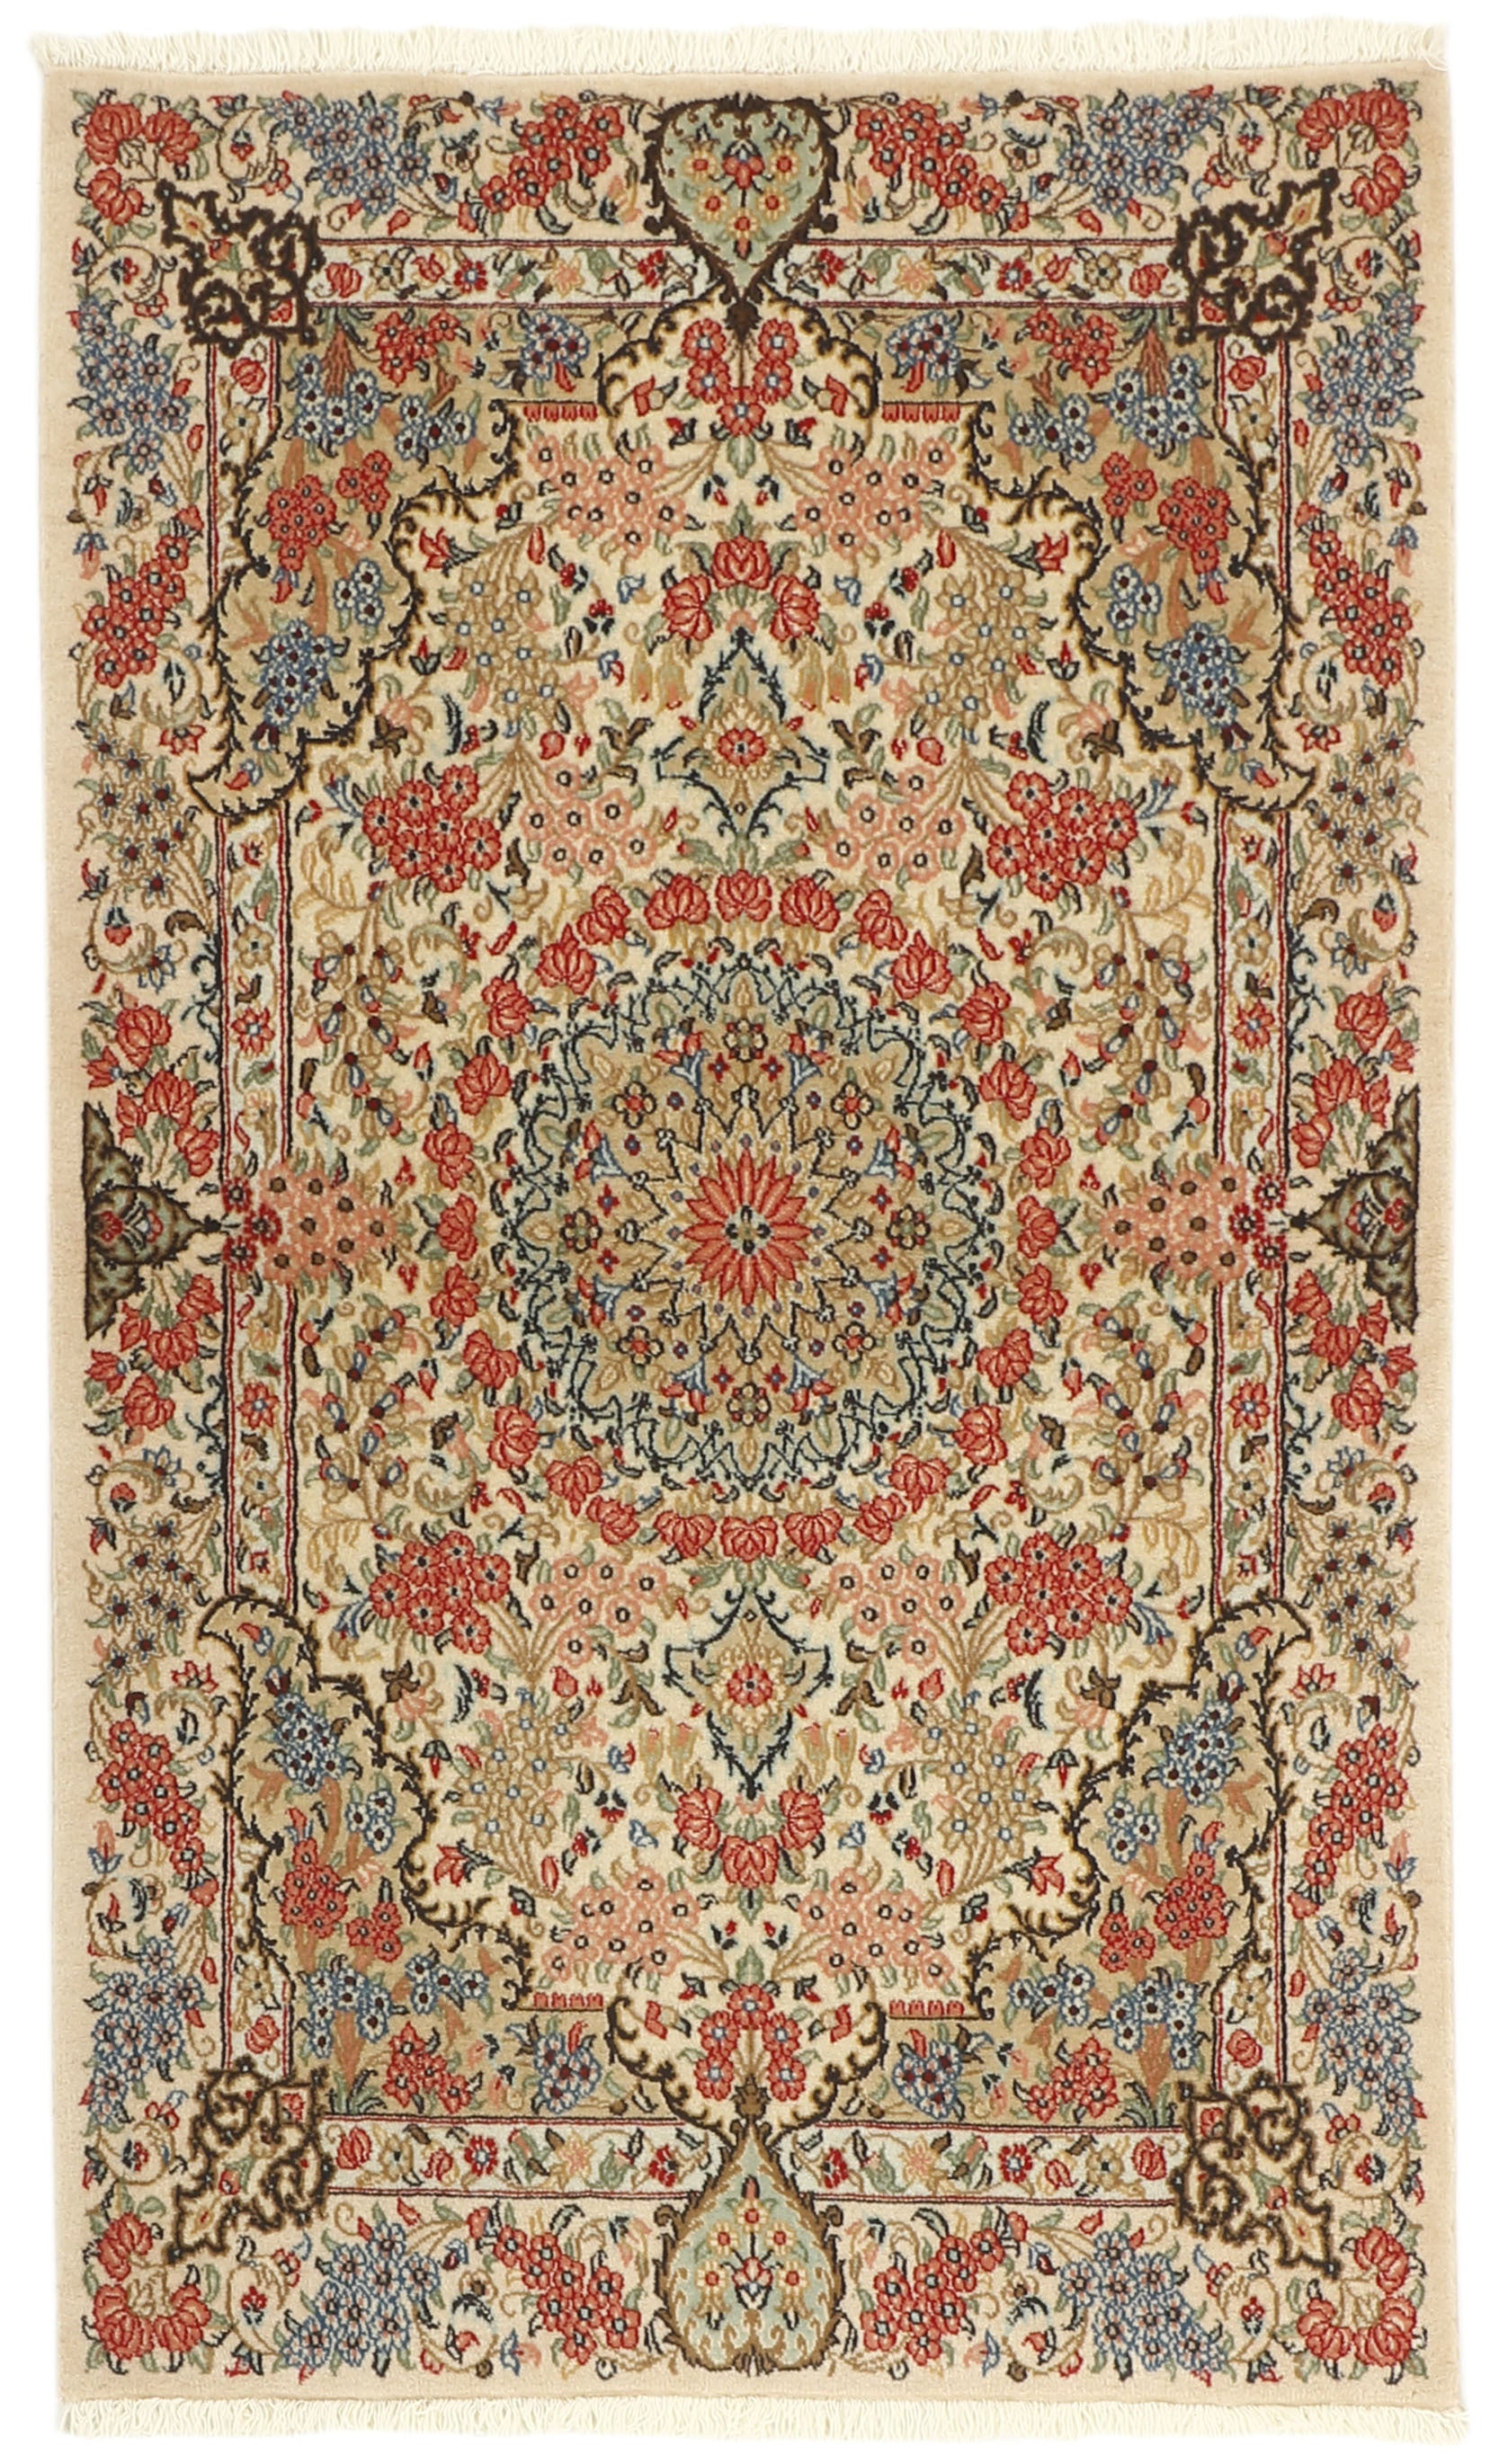 Authentic persian rug with a traditional floral design in red, blue, green, beige, brown and black